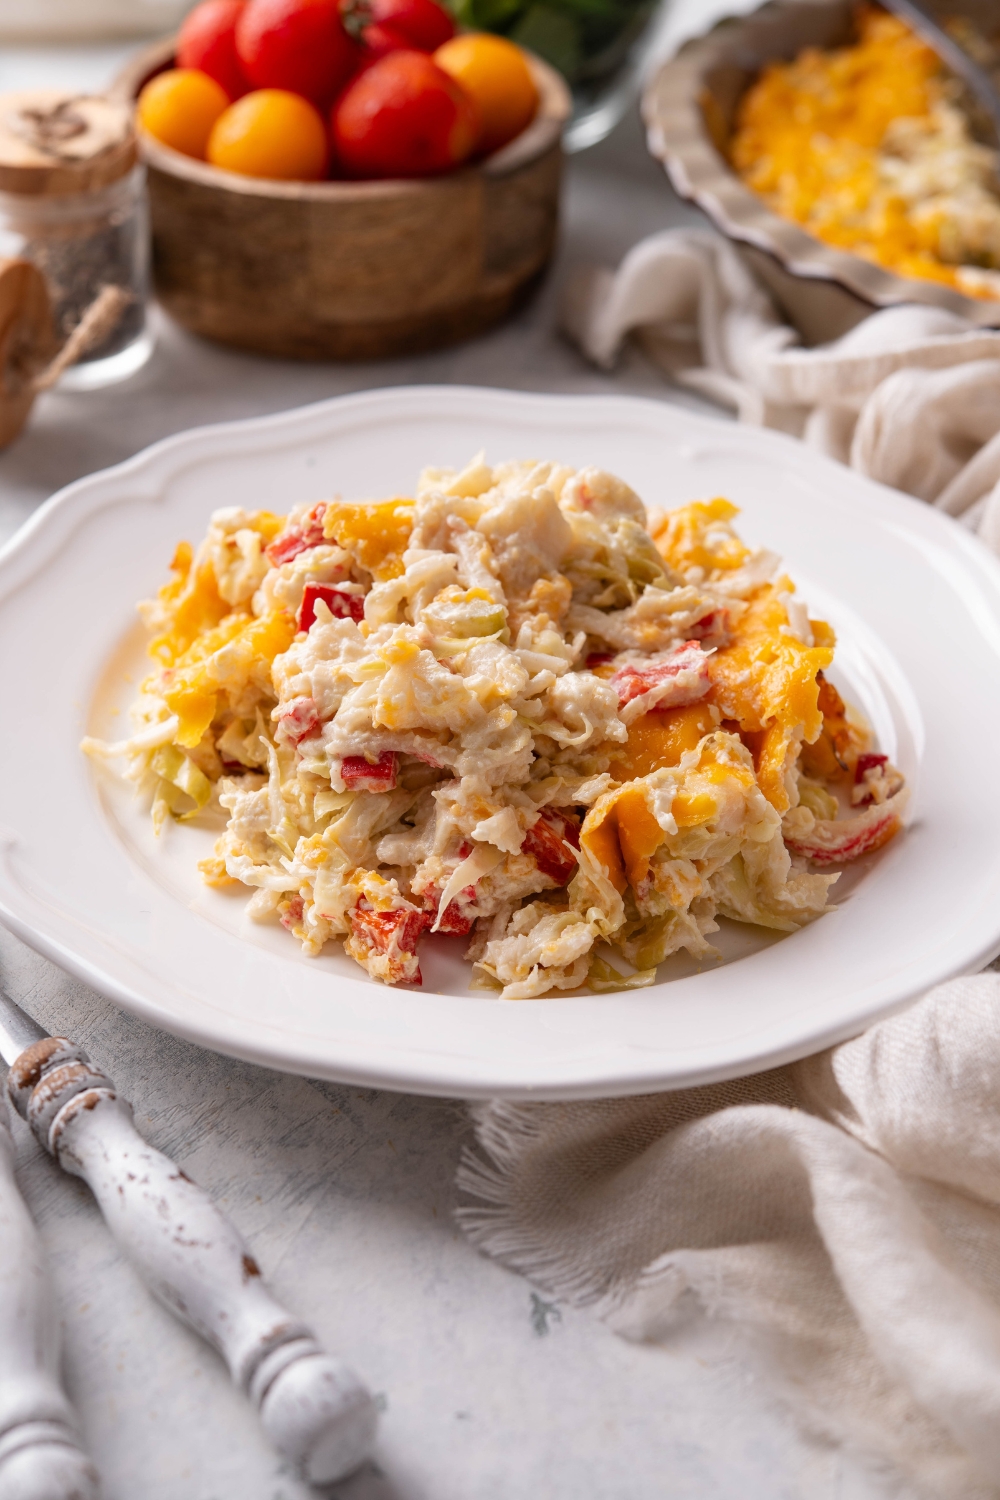 A plate of creamy crab casserole with melted cheese, diced red peppers, and sliced cabbage.